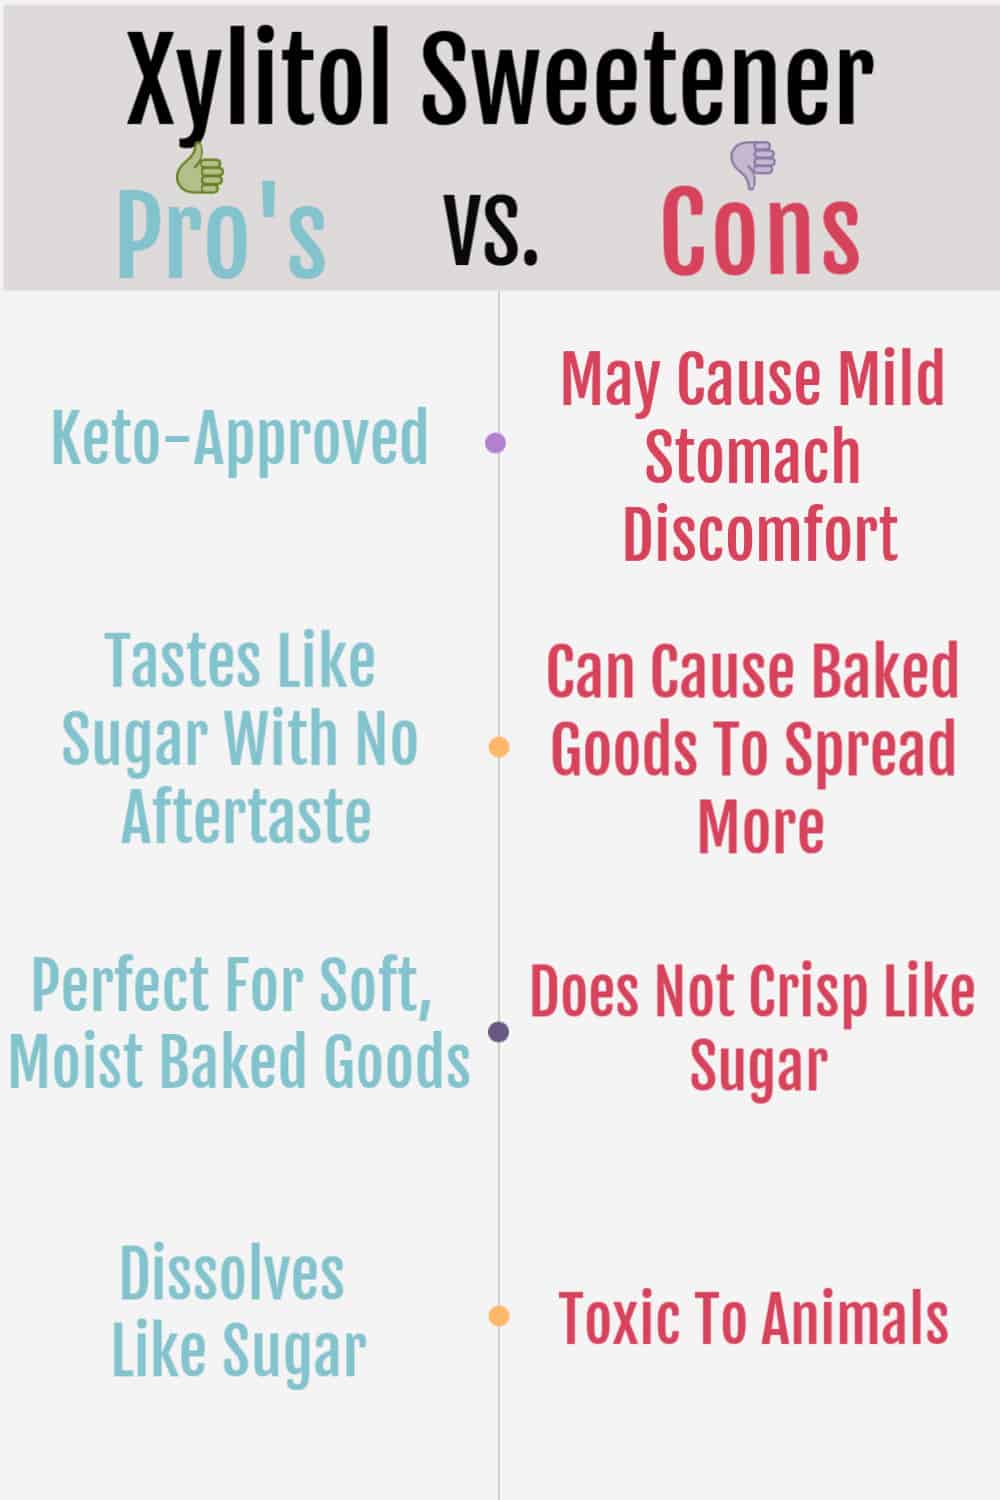 xylitol pros and cons chart